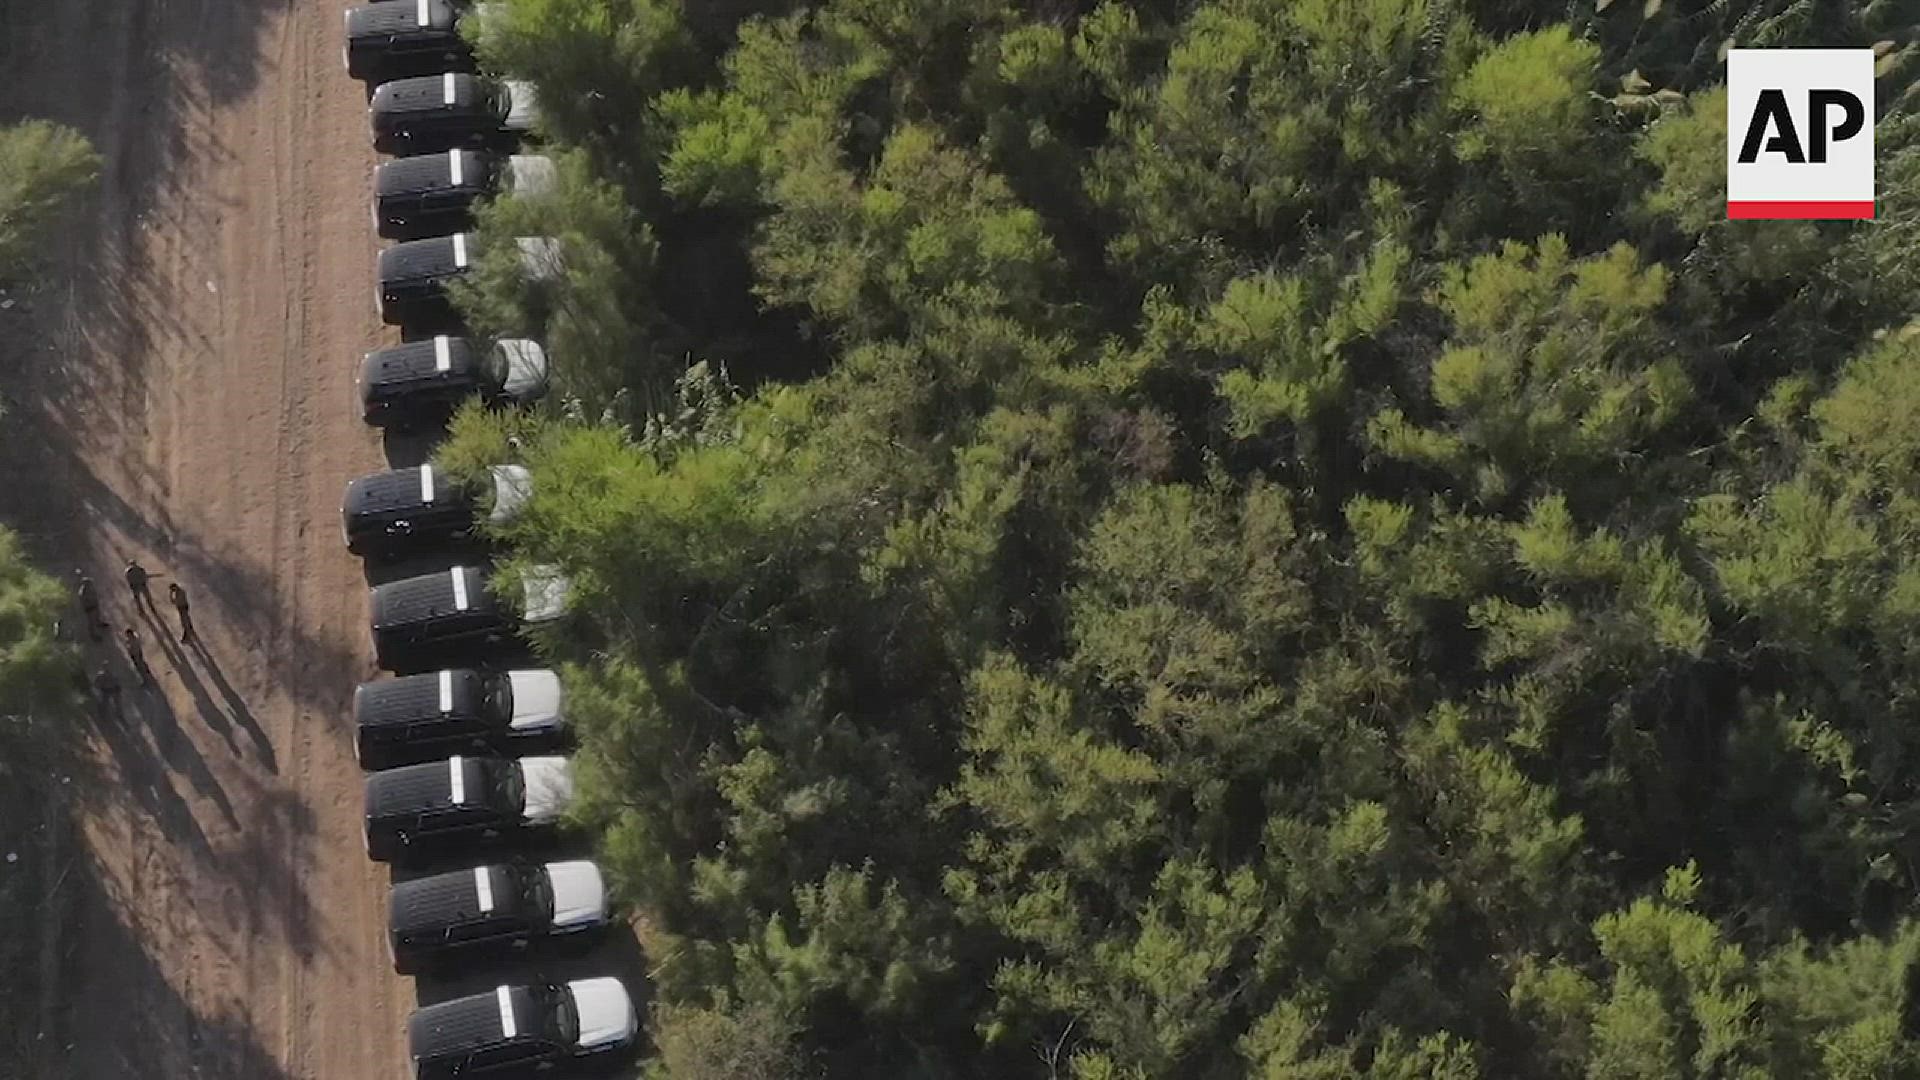 DPS State Troopers have created a miles-long “steel wall” of patrol vehicles to discourage more people from crossing the Rio Grande into an encampment.